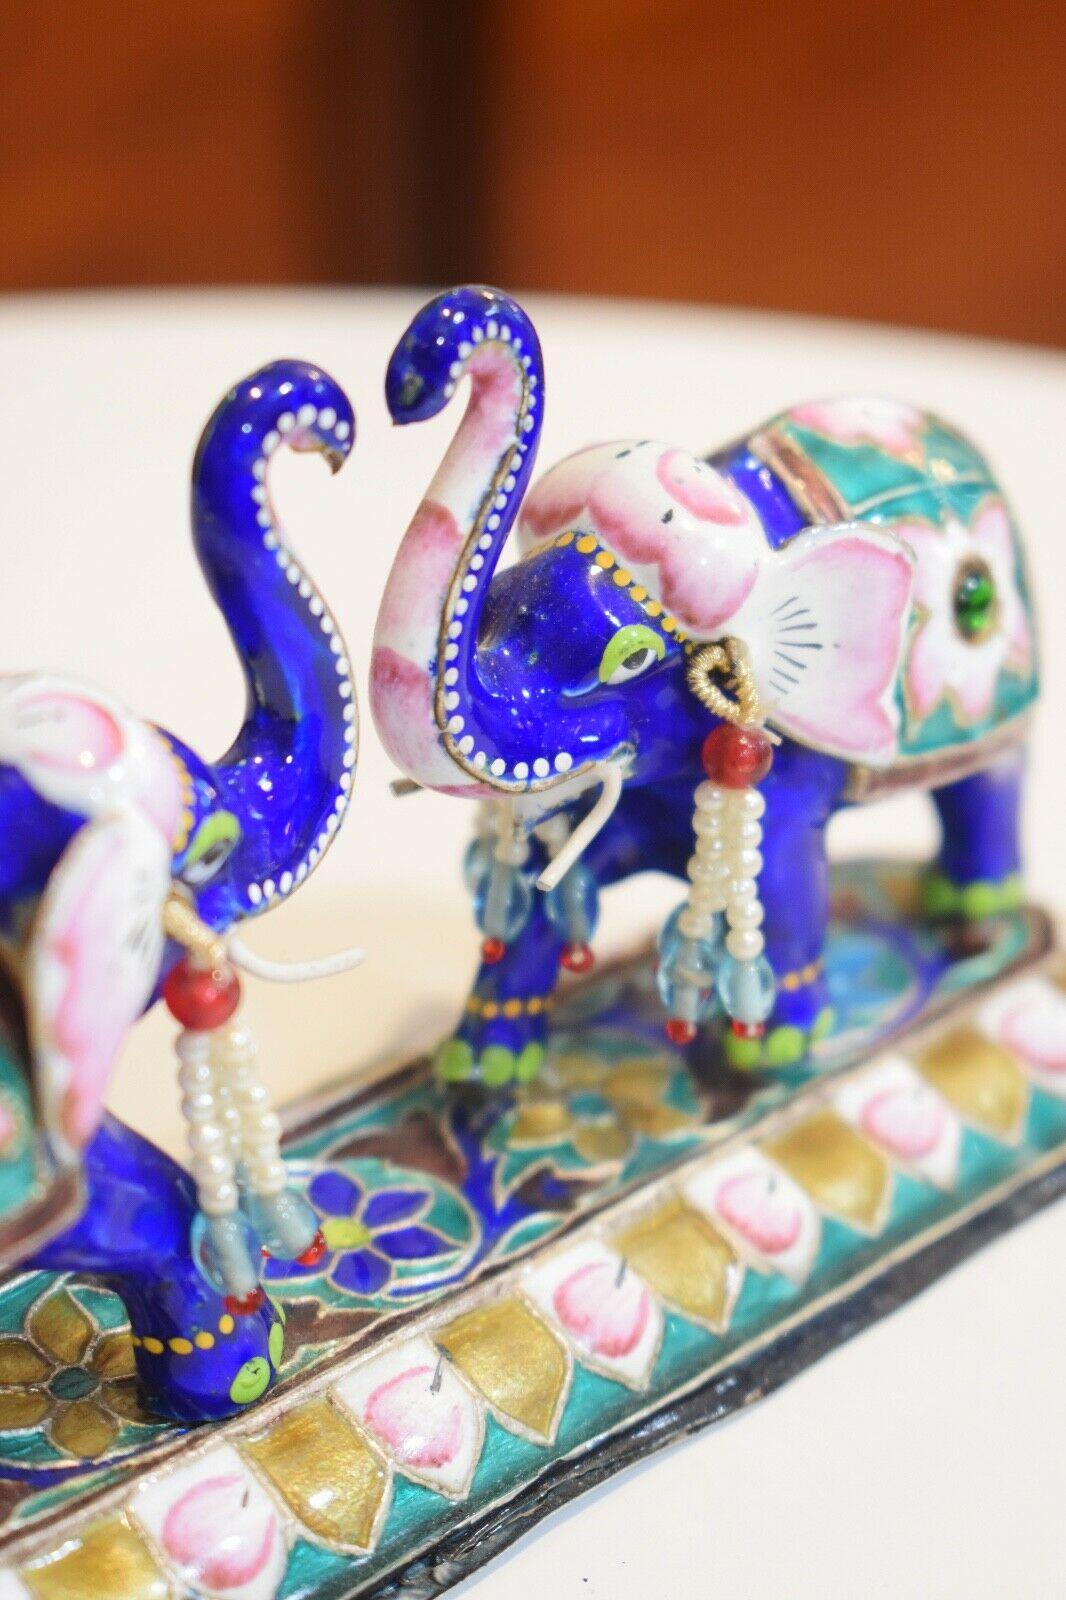 A beautiful vintage Indian enameled precious silver metal base figurine of two elephants meeting trunks to form a heart shape set on a decorative base.
Bright royal blue accompanied with pink, turquoise and gold..
Adorable heart shape being formed